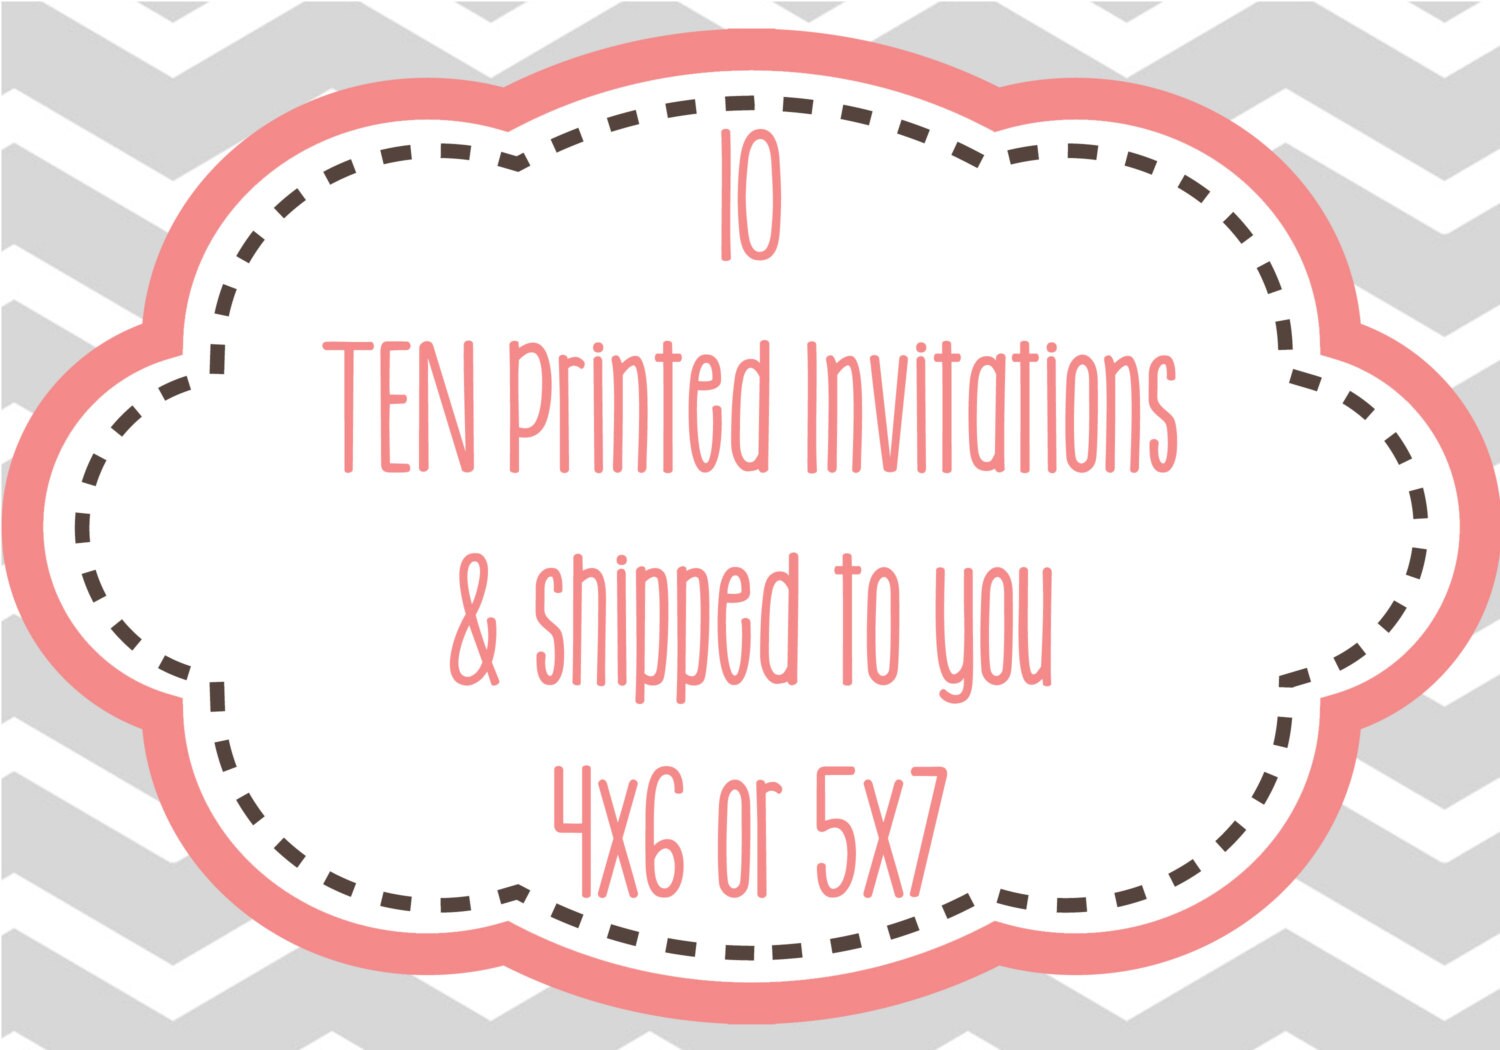 10-printed-invitations-4x6-or-5x7-shipping-included